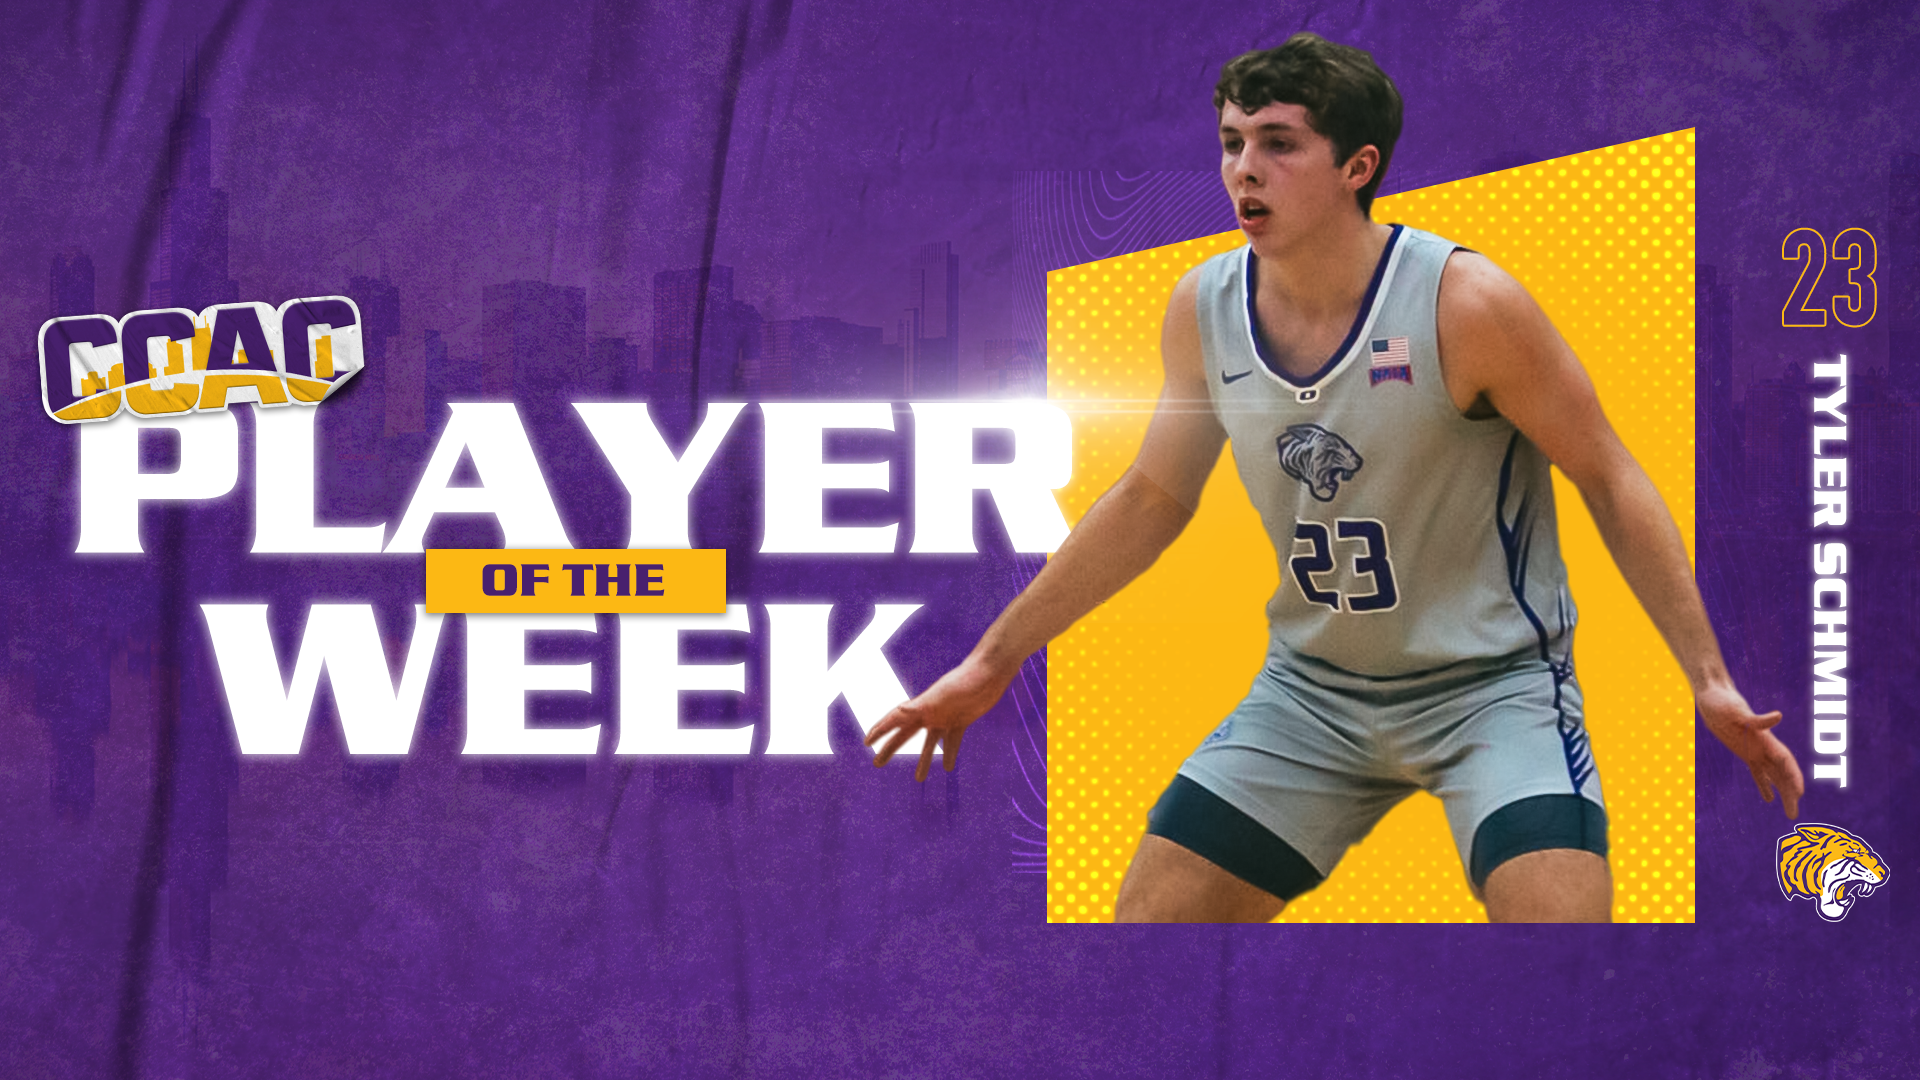 SCHMIDT REPEATS AS CCAC PLAYER OF THE WEEK